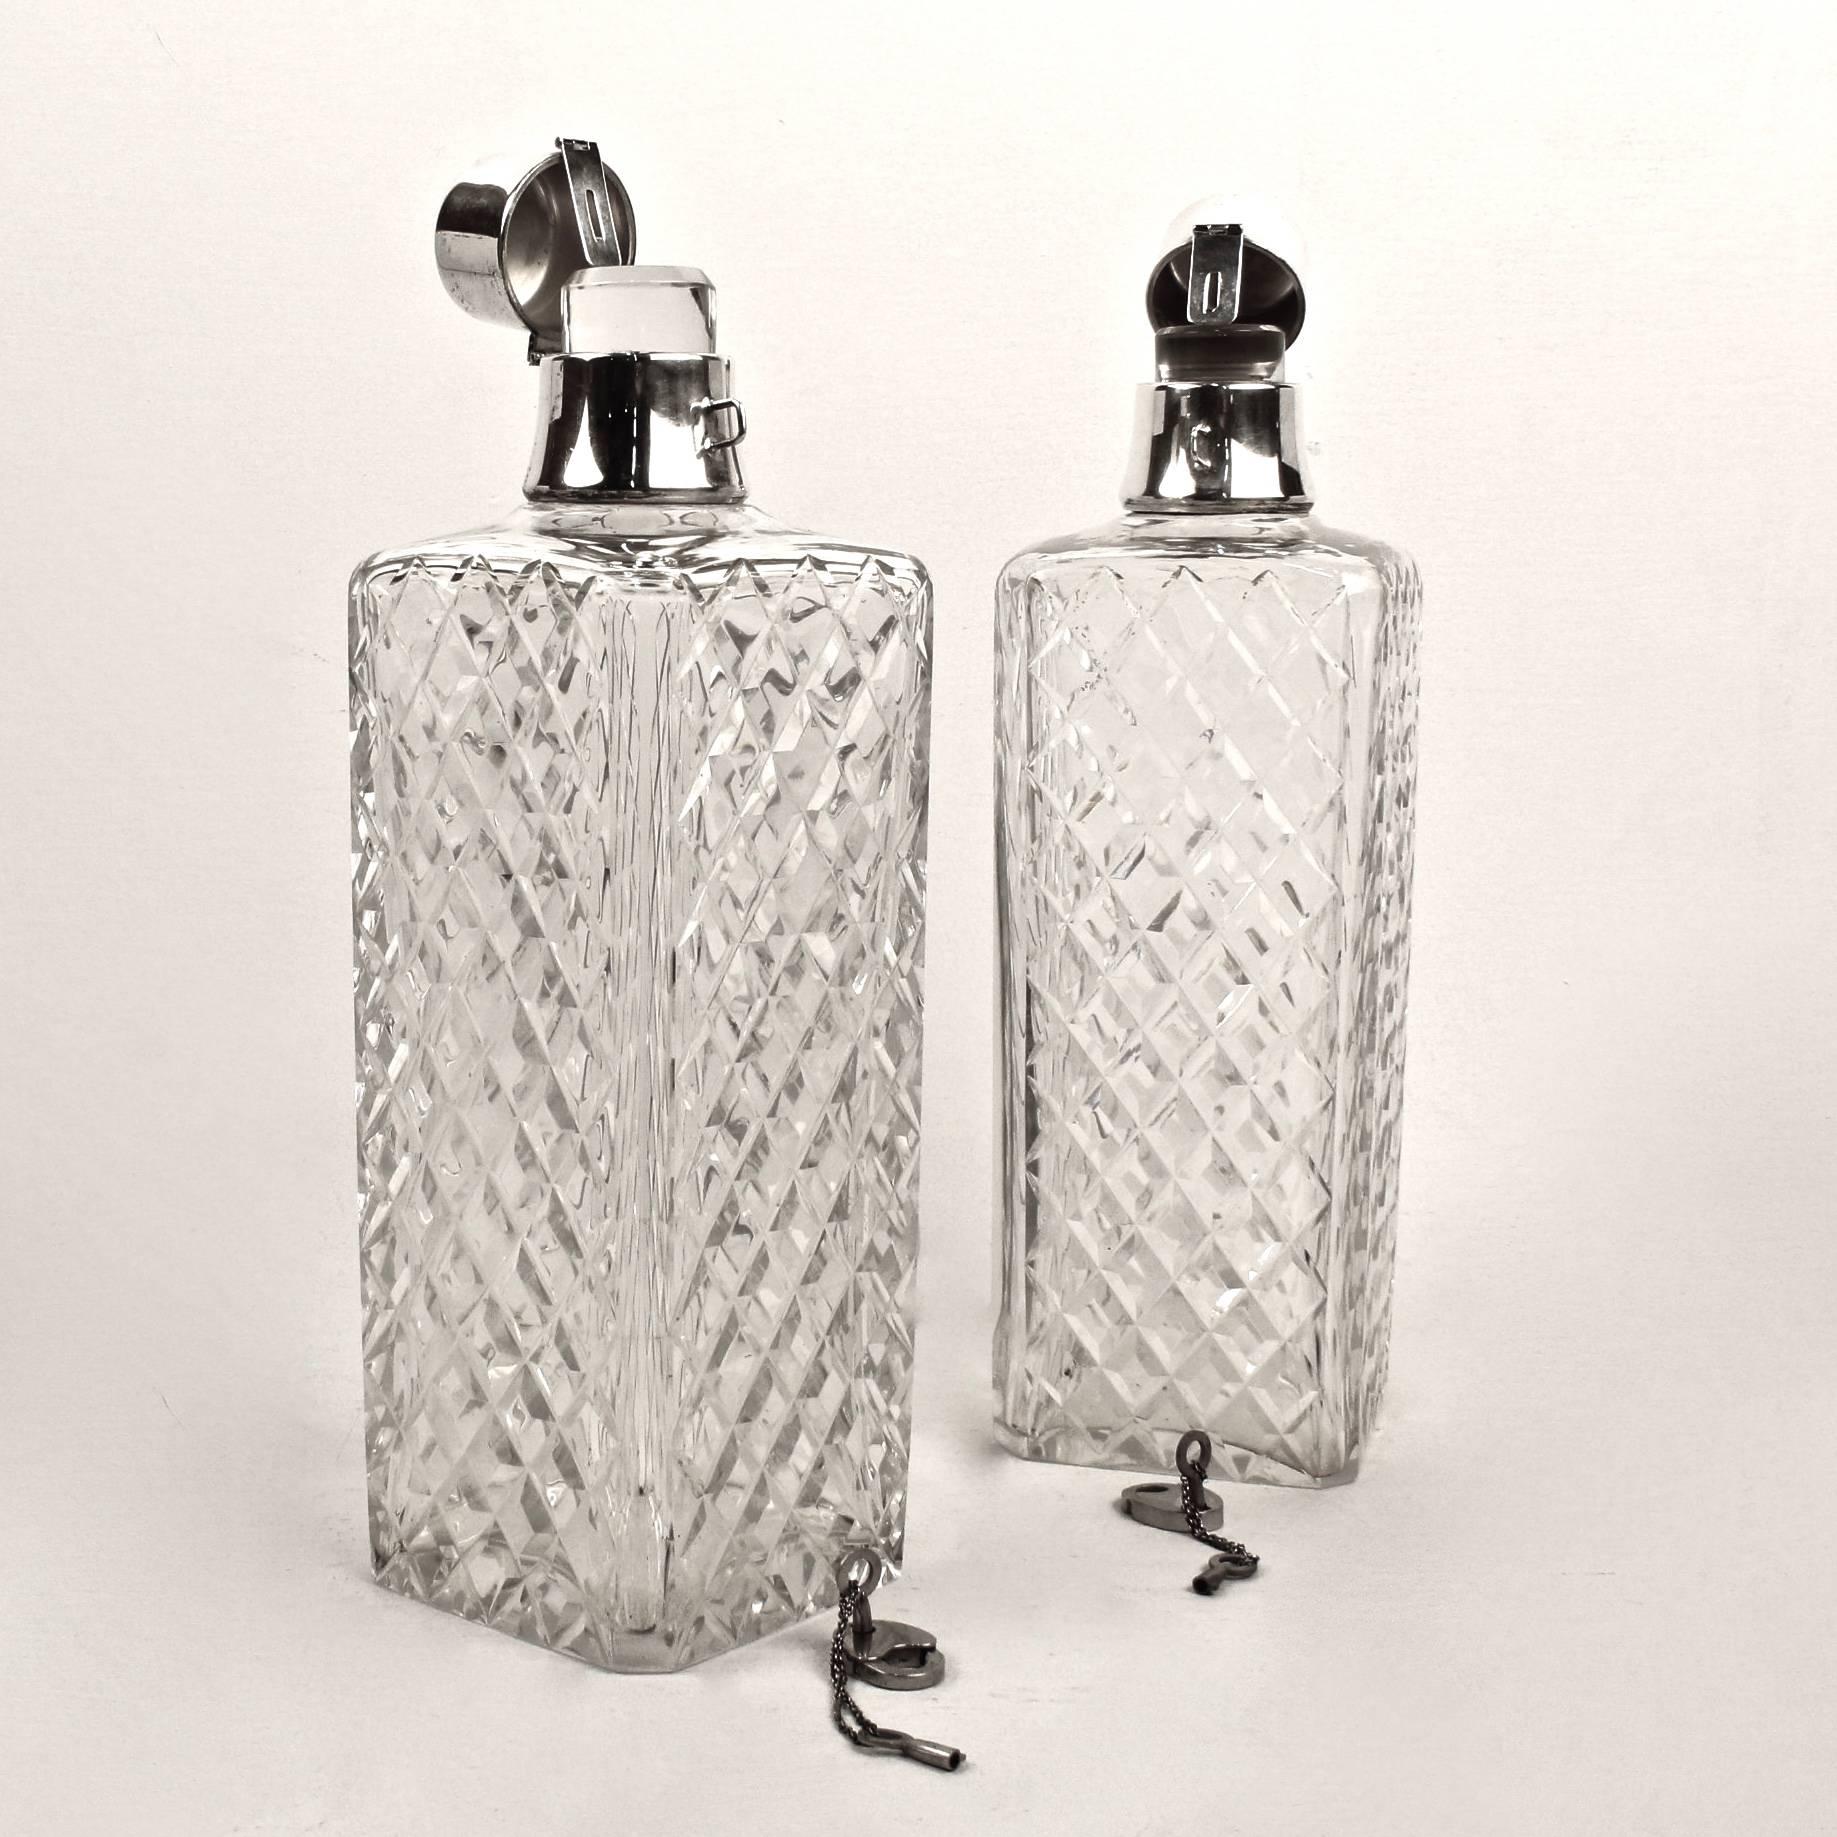 A terrific pair of hawkes cut crystal and sterling silver liquor decanters or cocktail bar bottles. 

Each square bodied bottle has a lockable sterling silver top that covers a glass stopper. The bodies are cut in a cross hatch pattern. 

Both